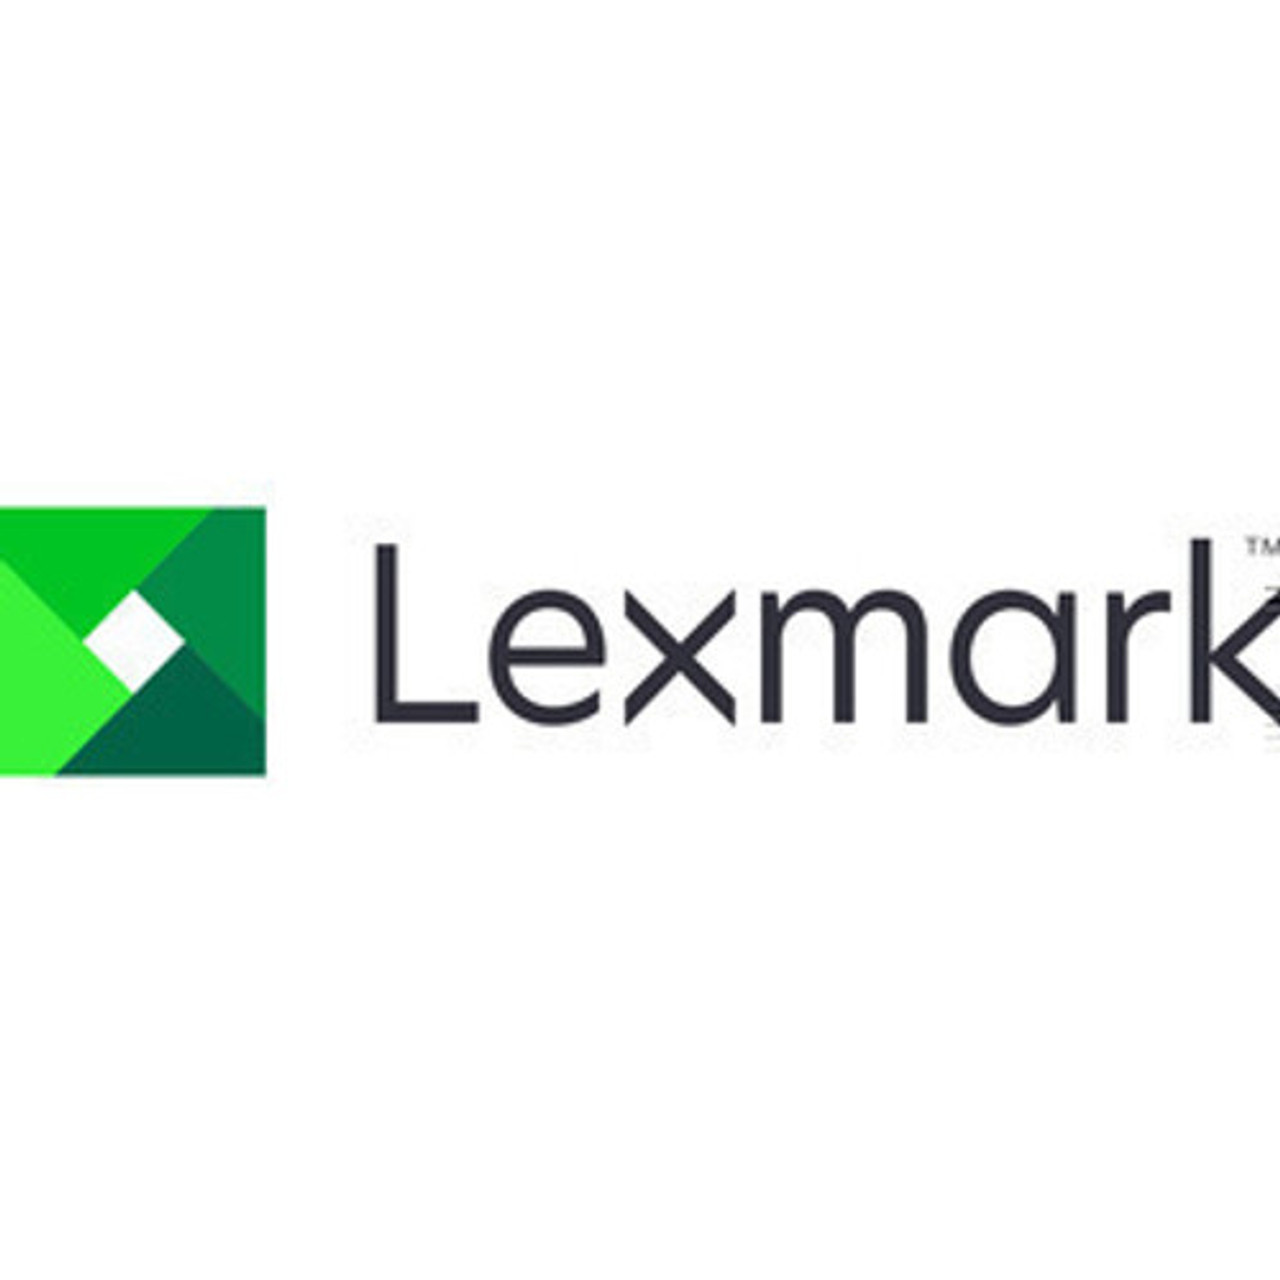 Lexmark 1 YEAR PARTS ONLY - CX331 - 2379212